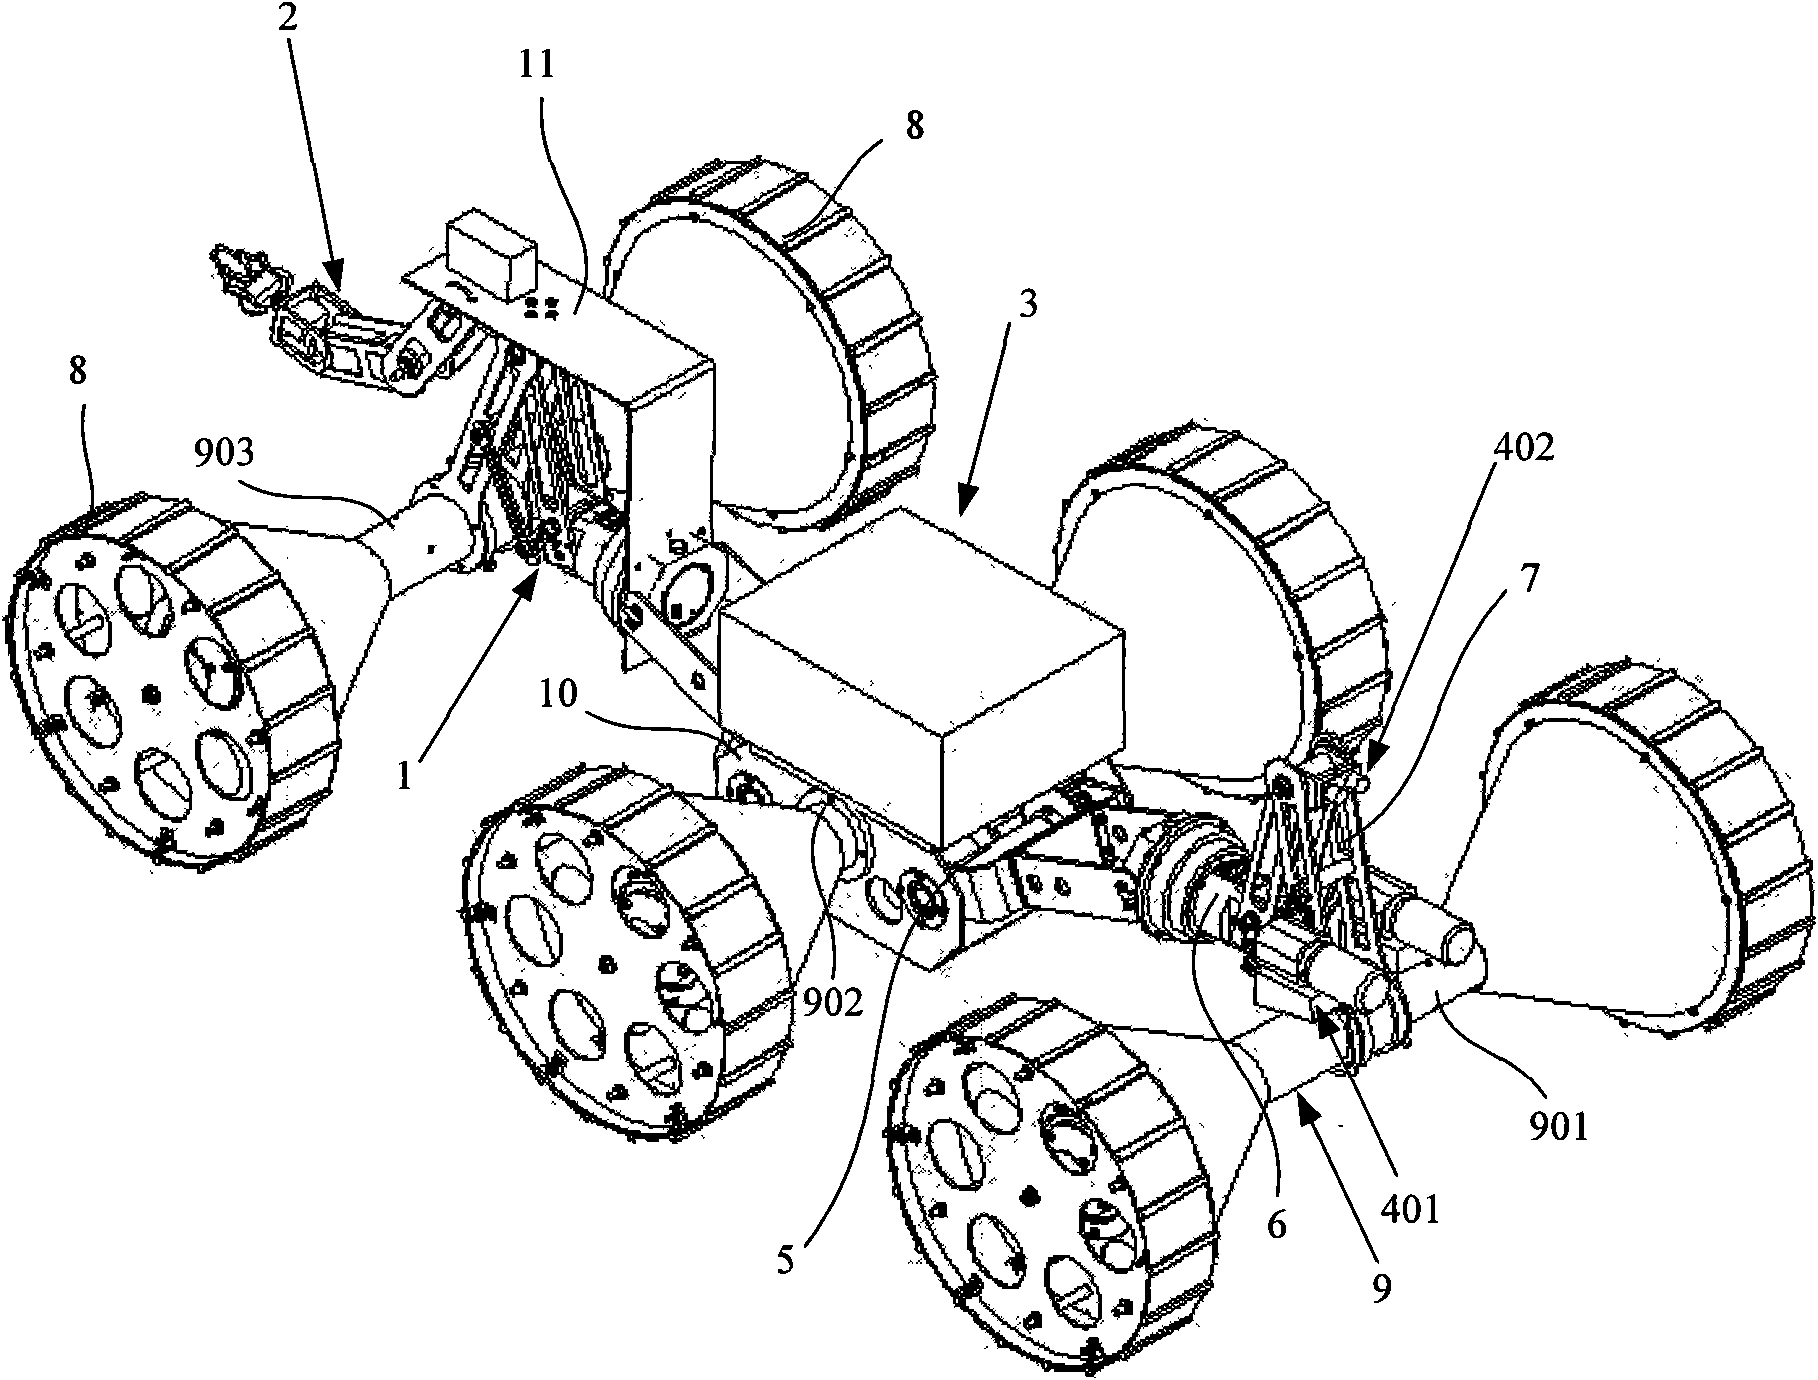 Multi-joint series wheeled mobile robot